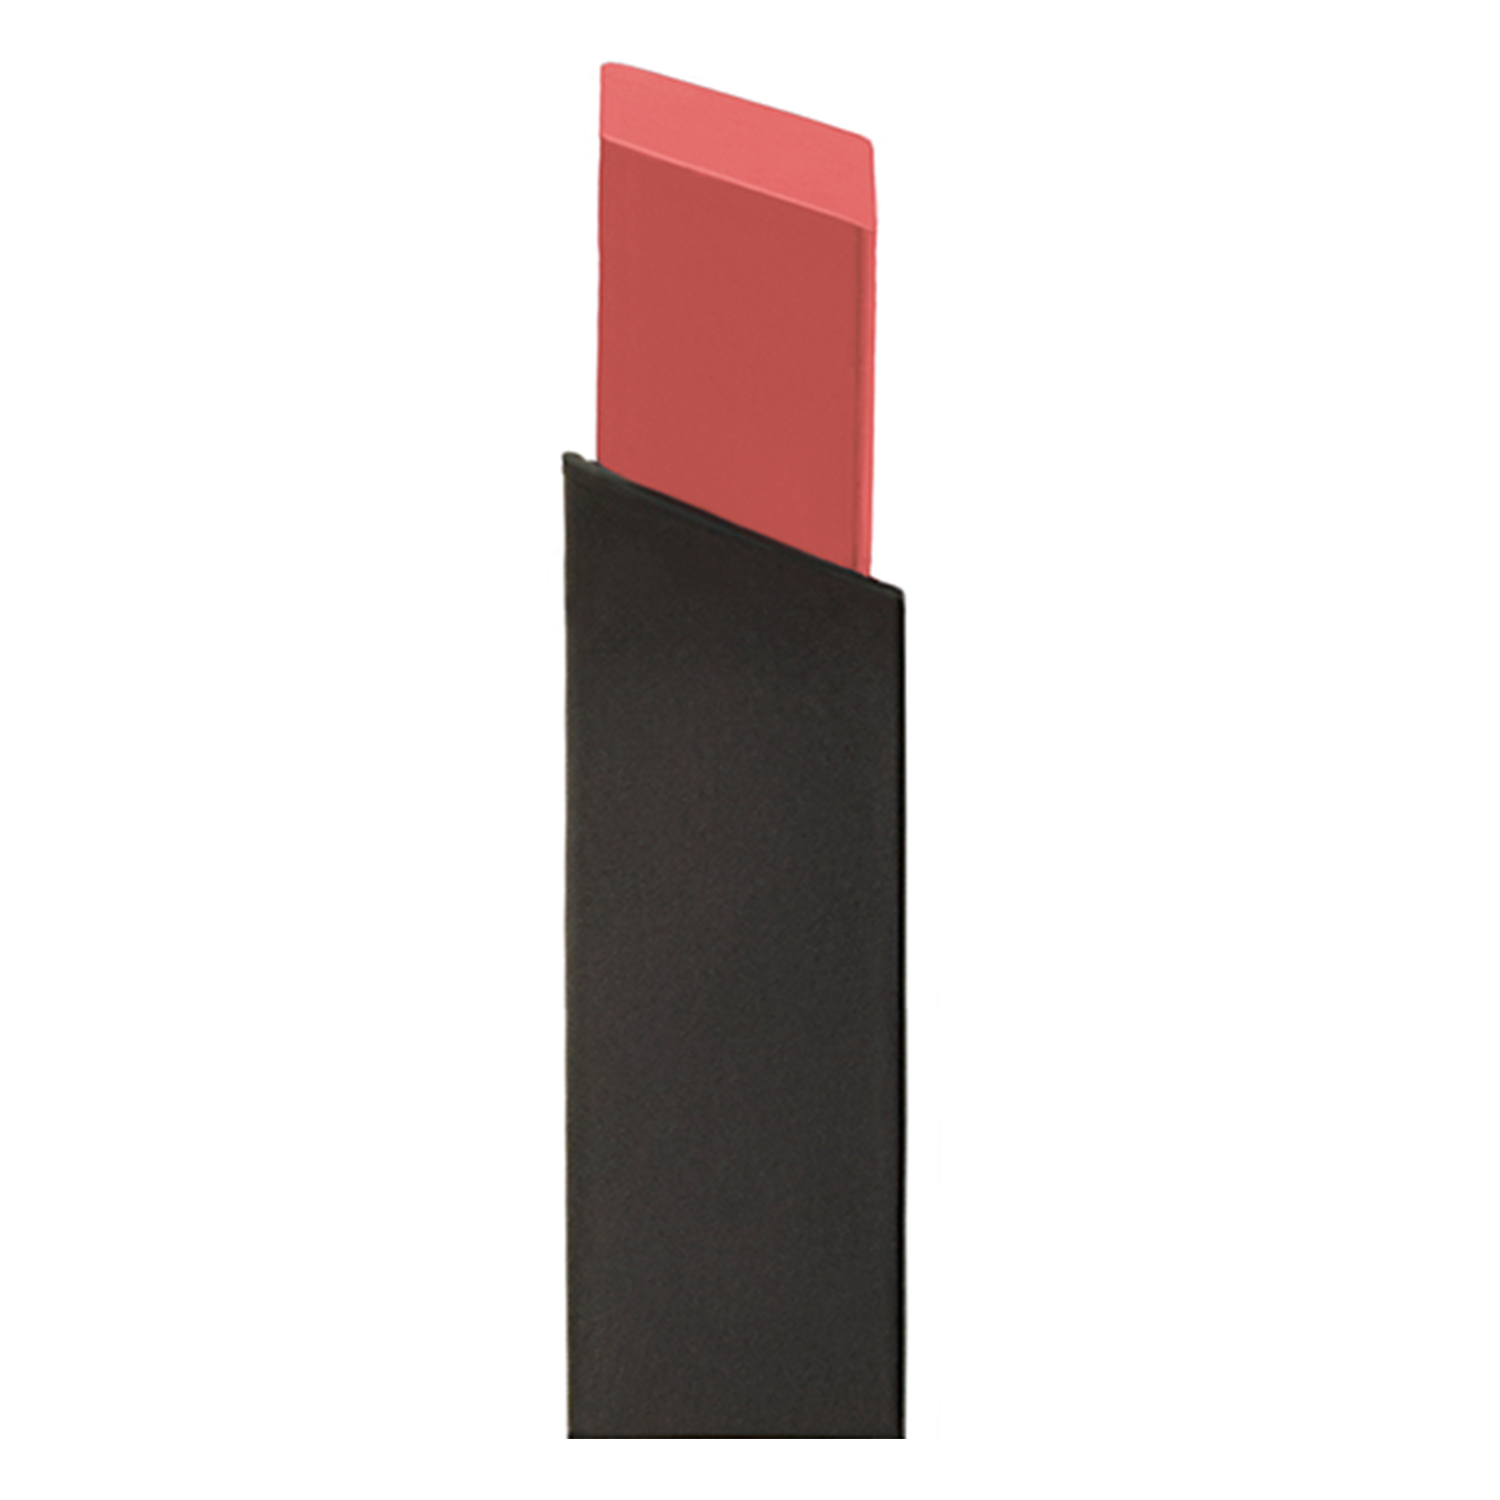 ROUGE PUR COUTURE THE SLIM (LABIAL)